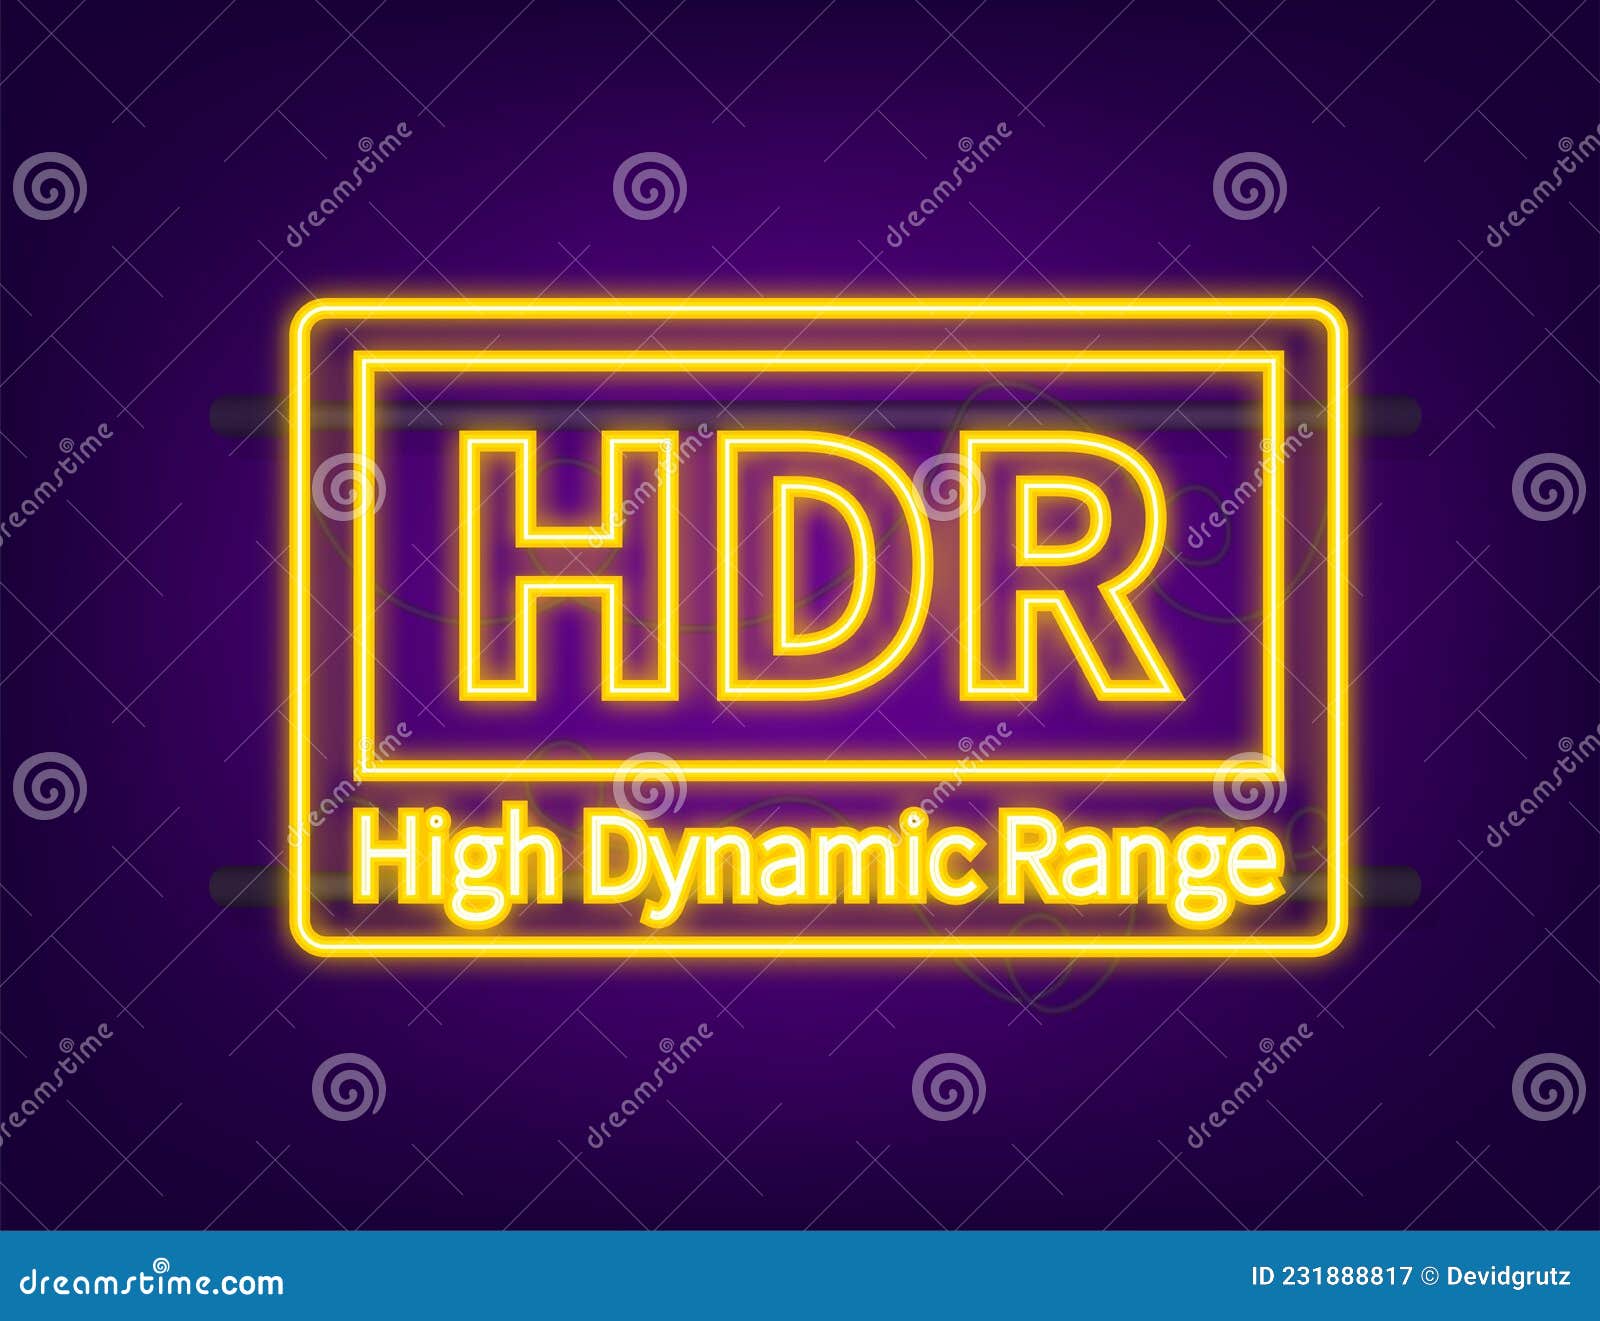 high dynamic range imaging, high definition. hdr. neon icon.  